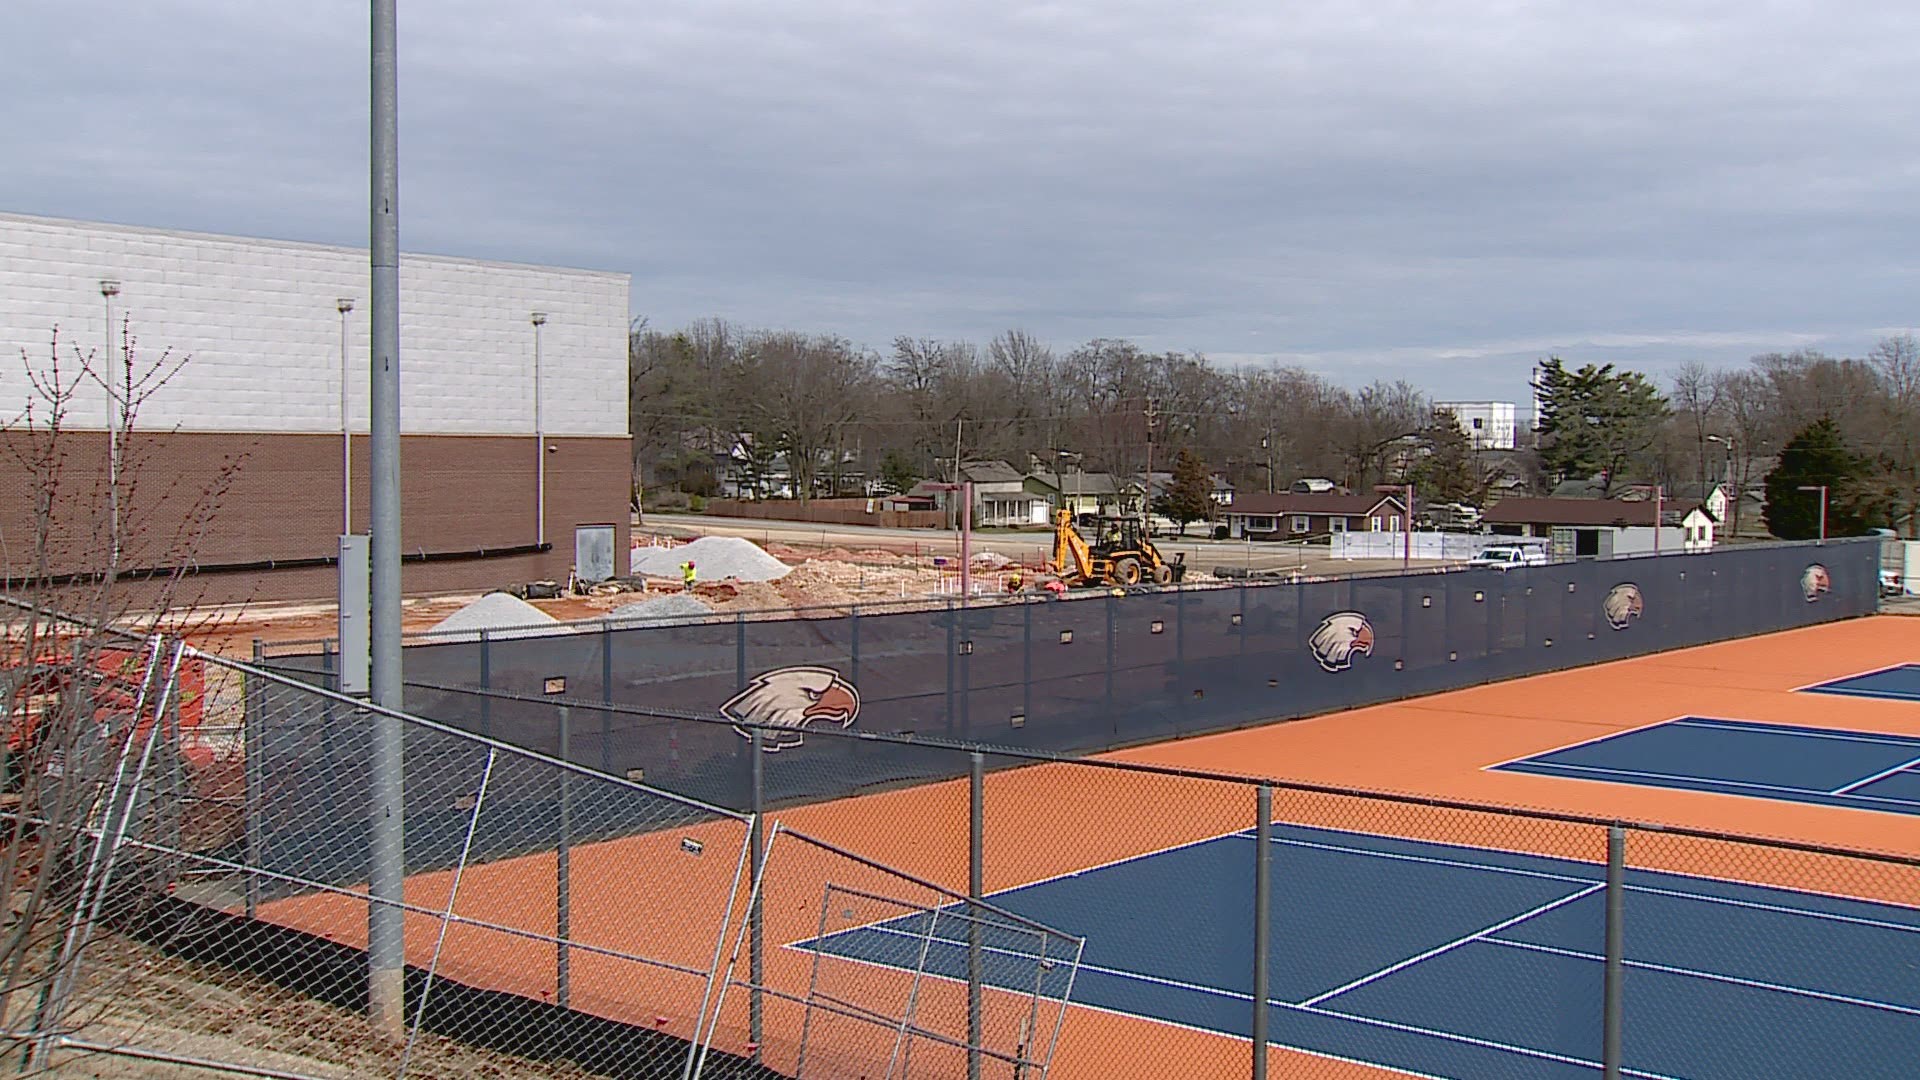 Construction is underway of brand-new athletic facilities at two Rogers high schools.
School officials say the $53-million project is slightly behind schedule.